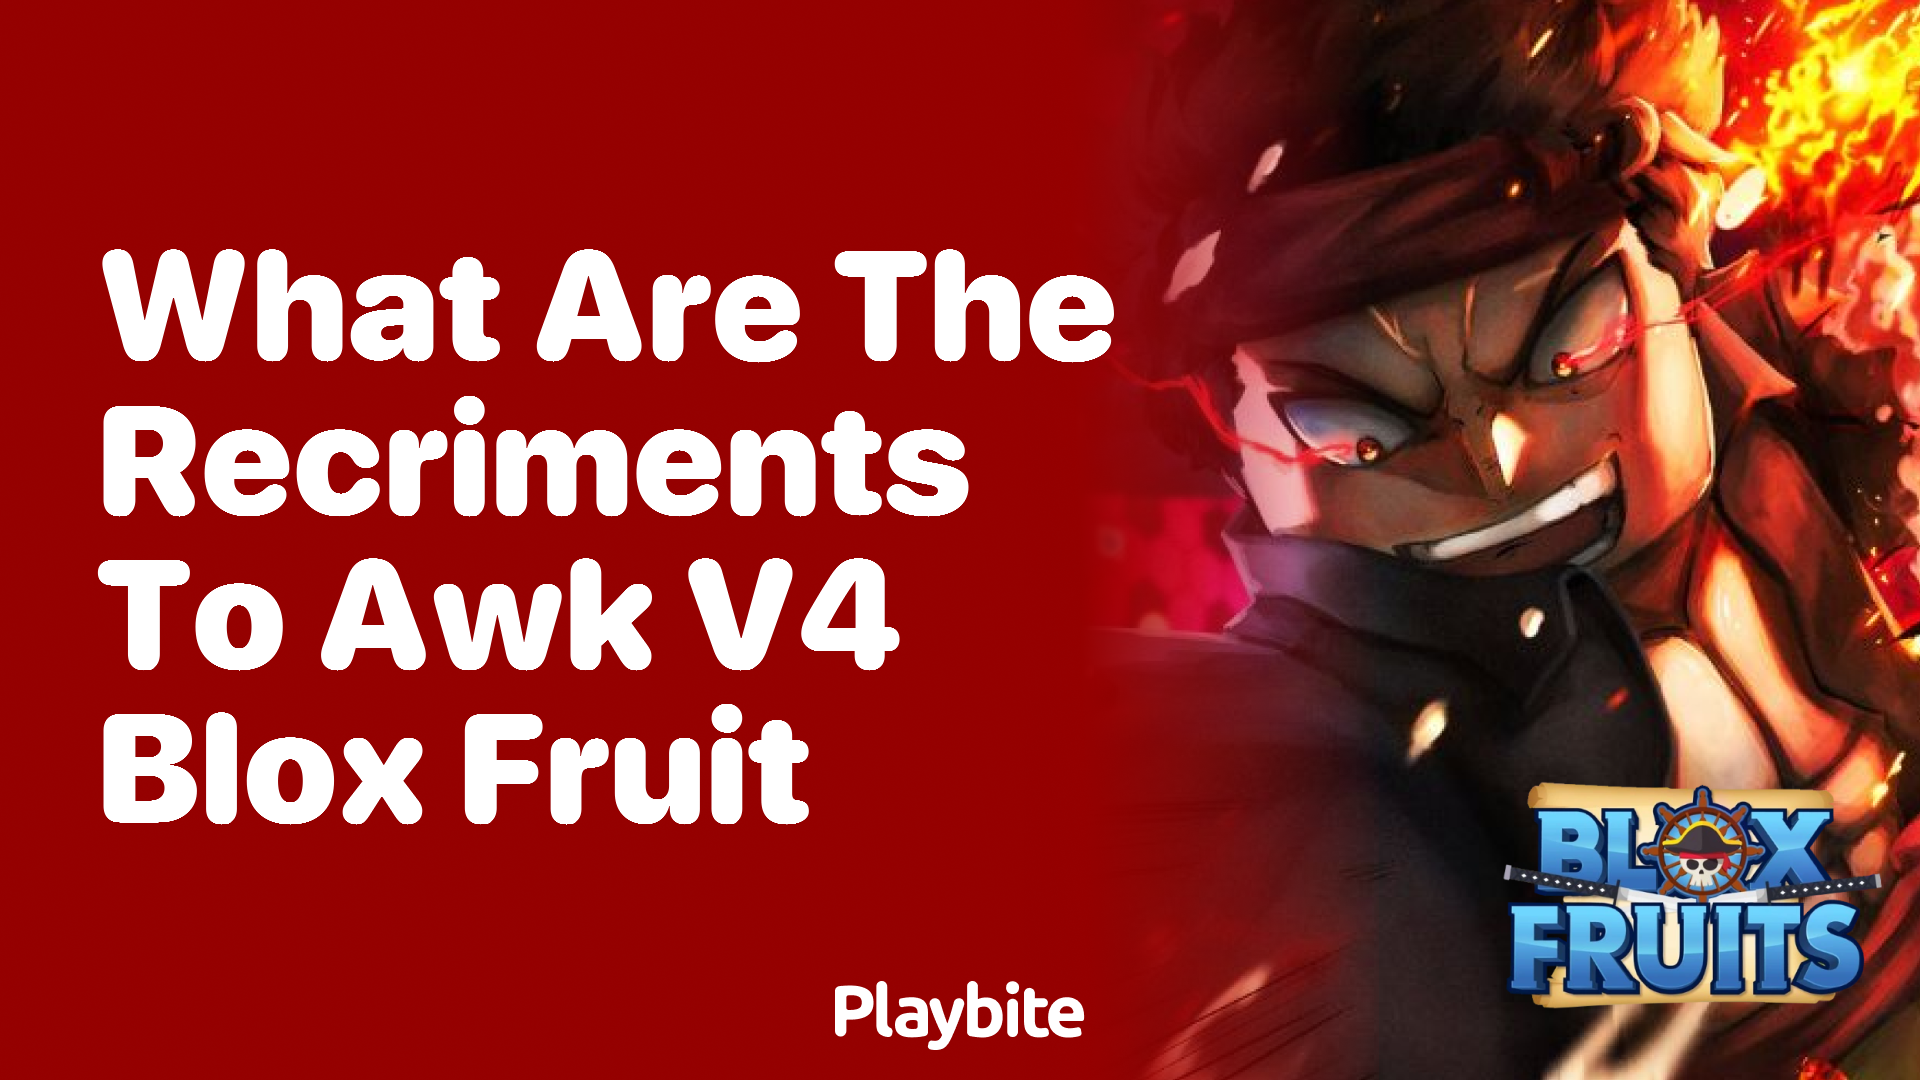 What Are the Requirements to Awaken V4 Blox Fruit?